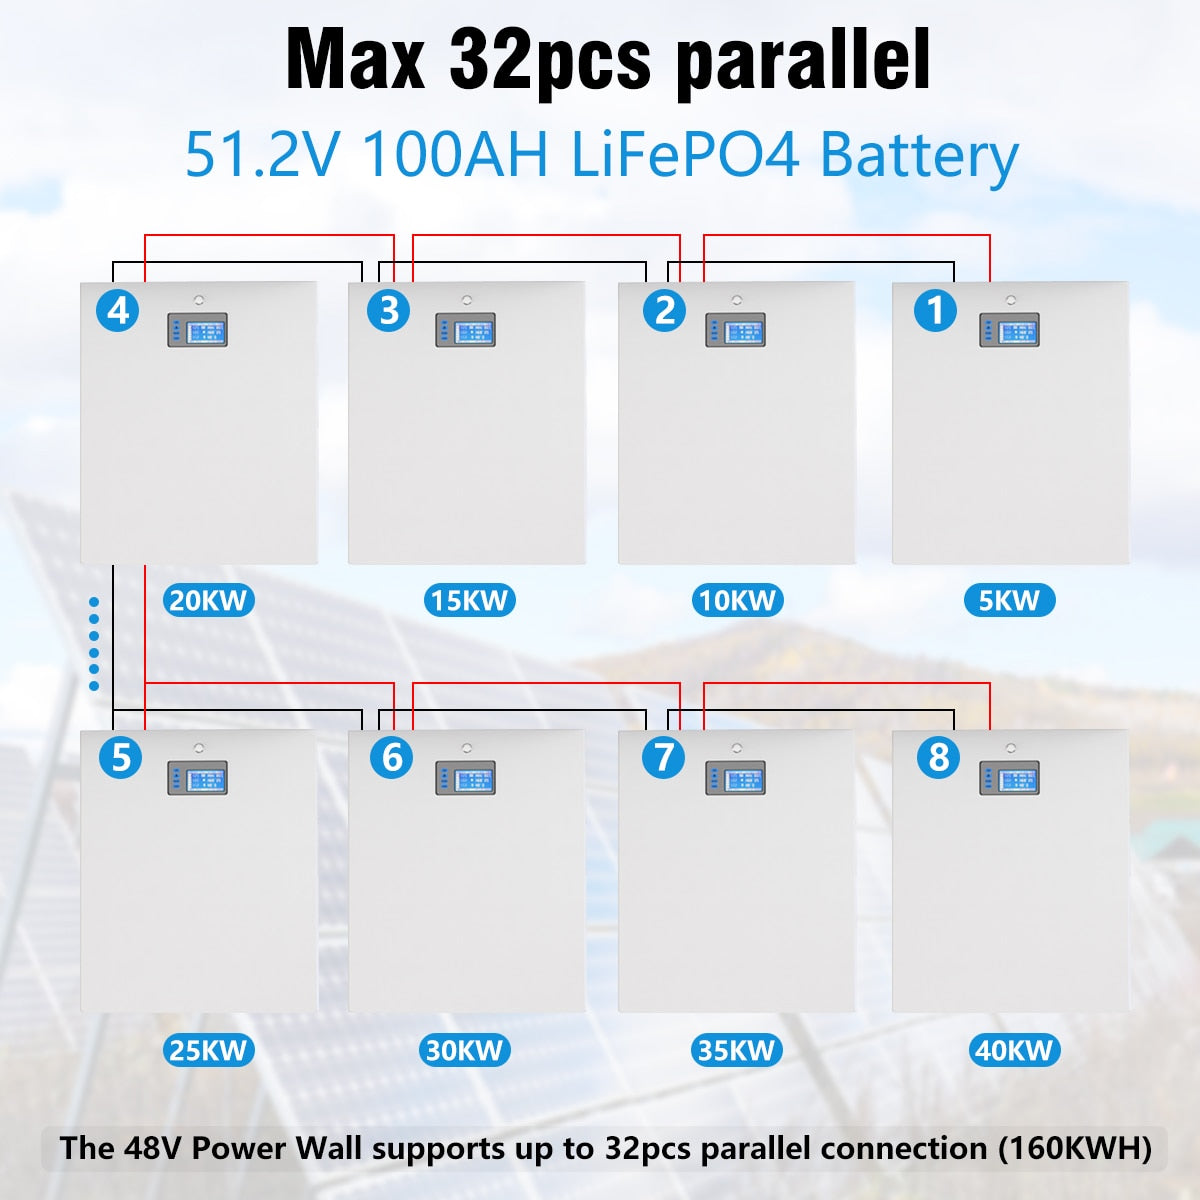 48V Power Wall supports up to 32pcs parallel connection (